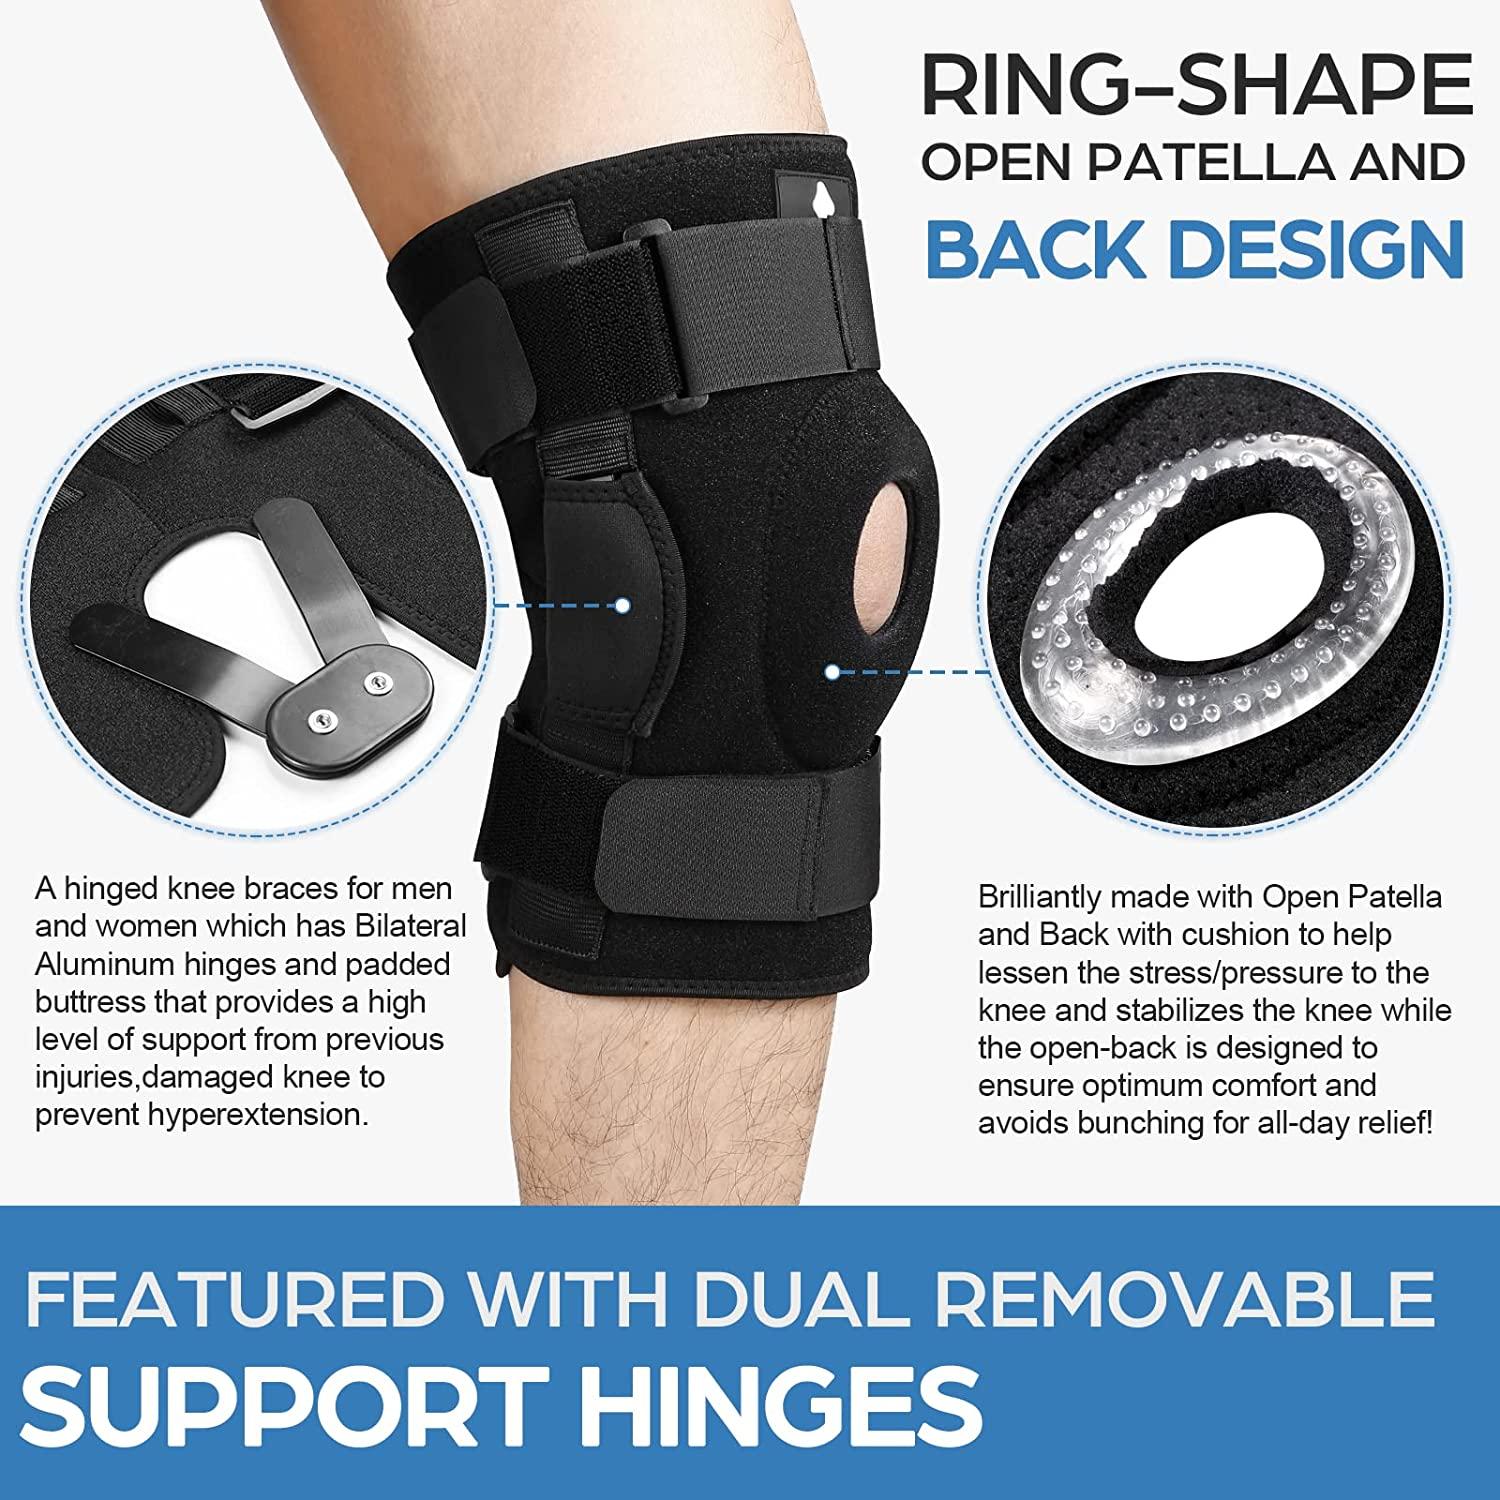 WHY ARE THERE HINGES IN MY KNEE BRACE?